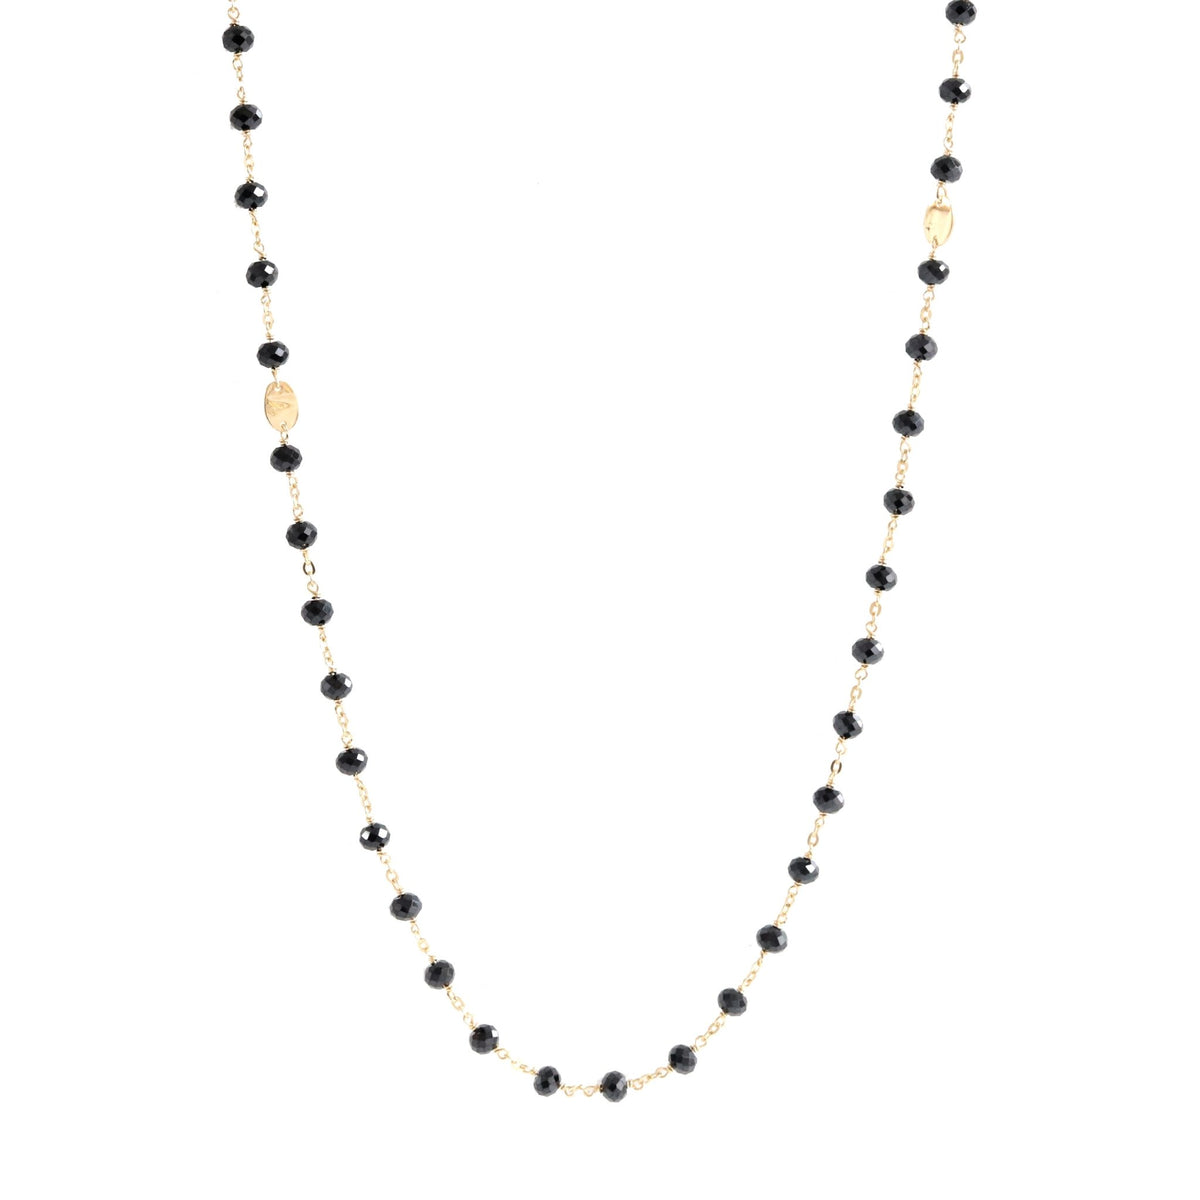 ICONIC LONG BEADED NECKLACE - BLACK ONYX &amp; GOLD 34&quot; - SO PRETTY CARA COTTER